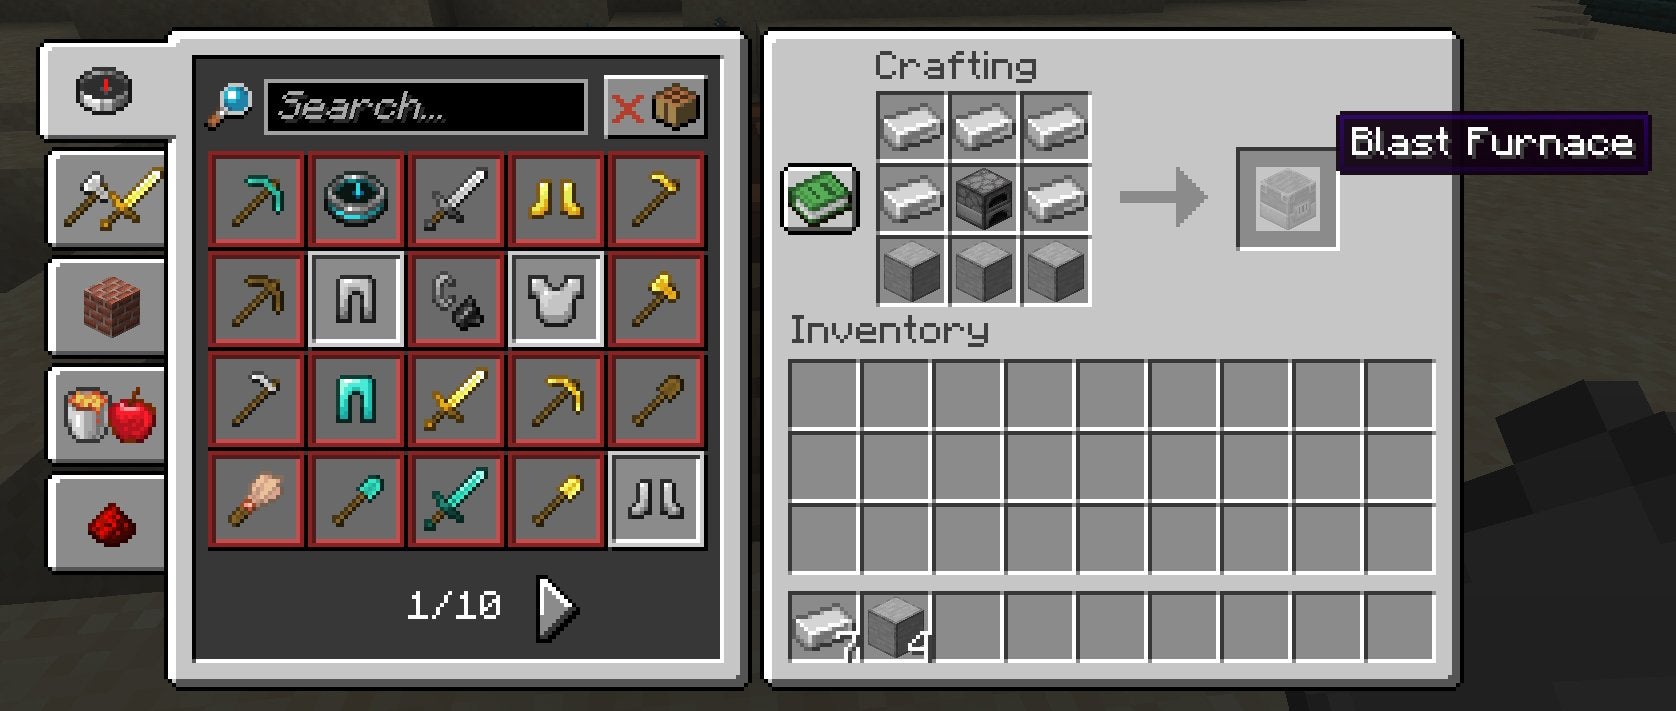 The crafting recipe for a Blast Furnace in Minecraft.